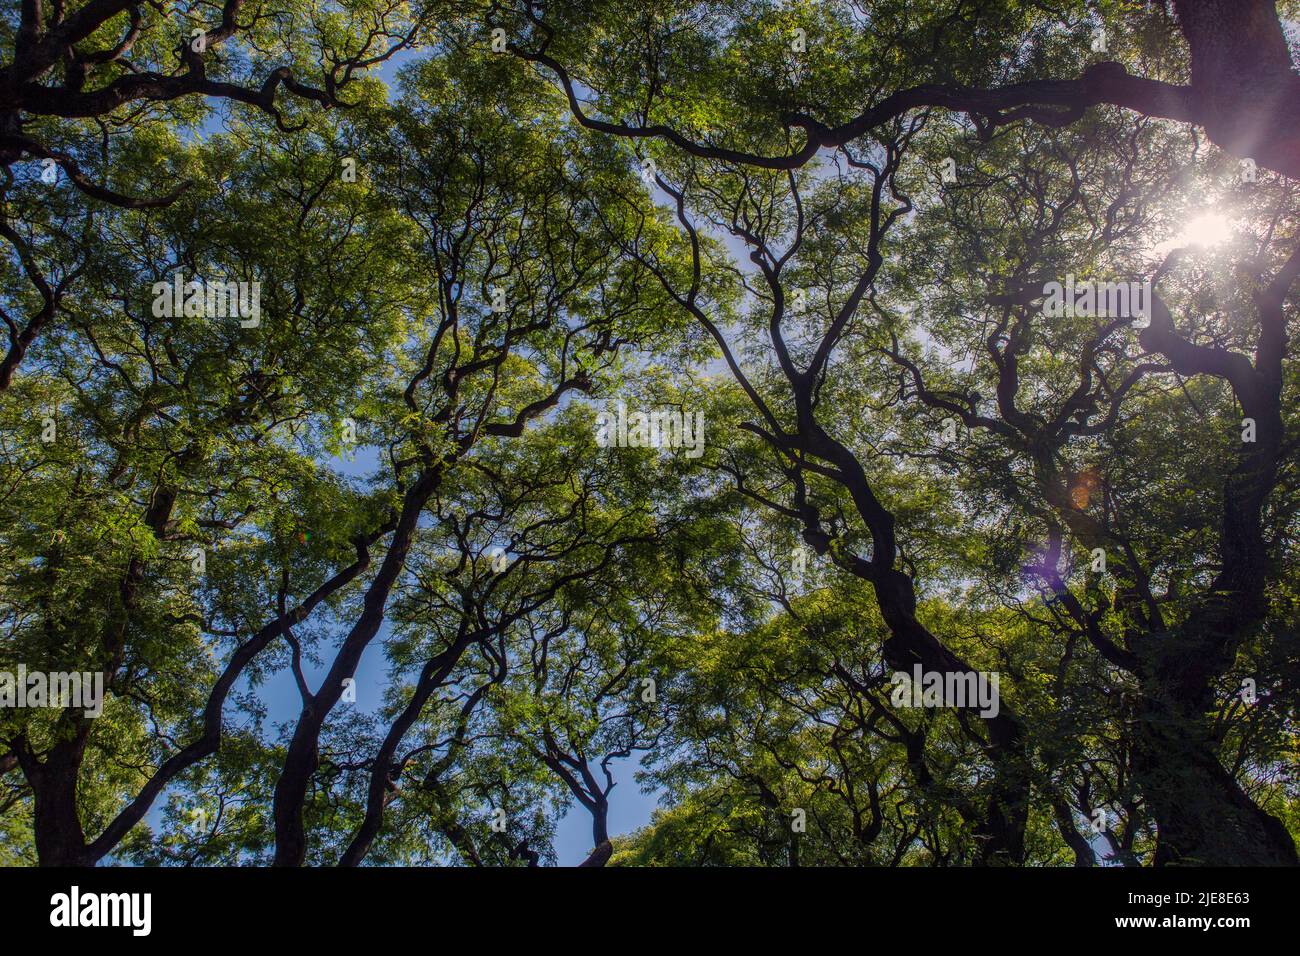 view of lush forest of Tipuana tipu tree seen from below Stock Photo